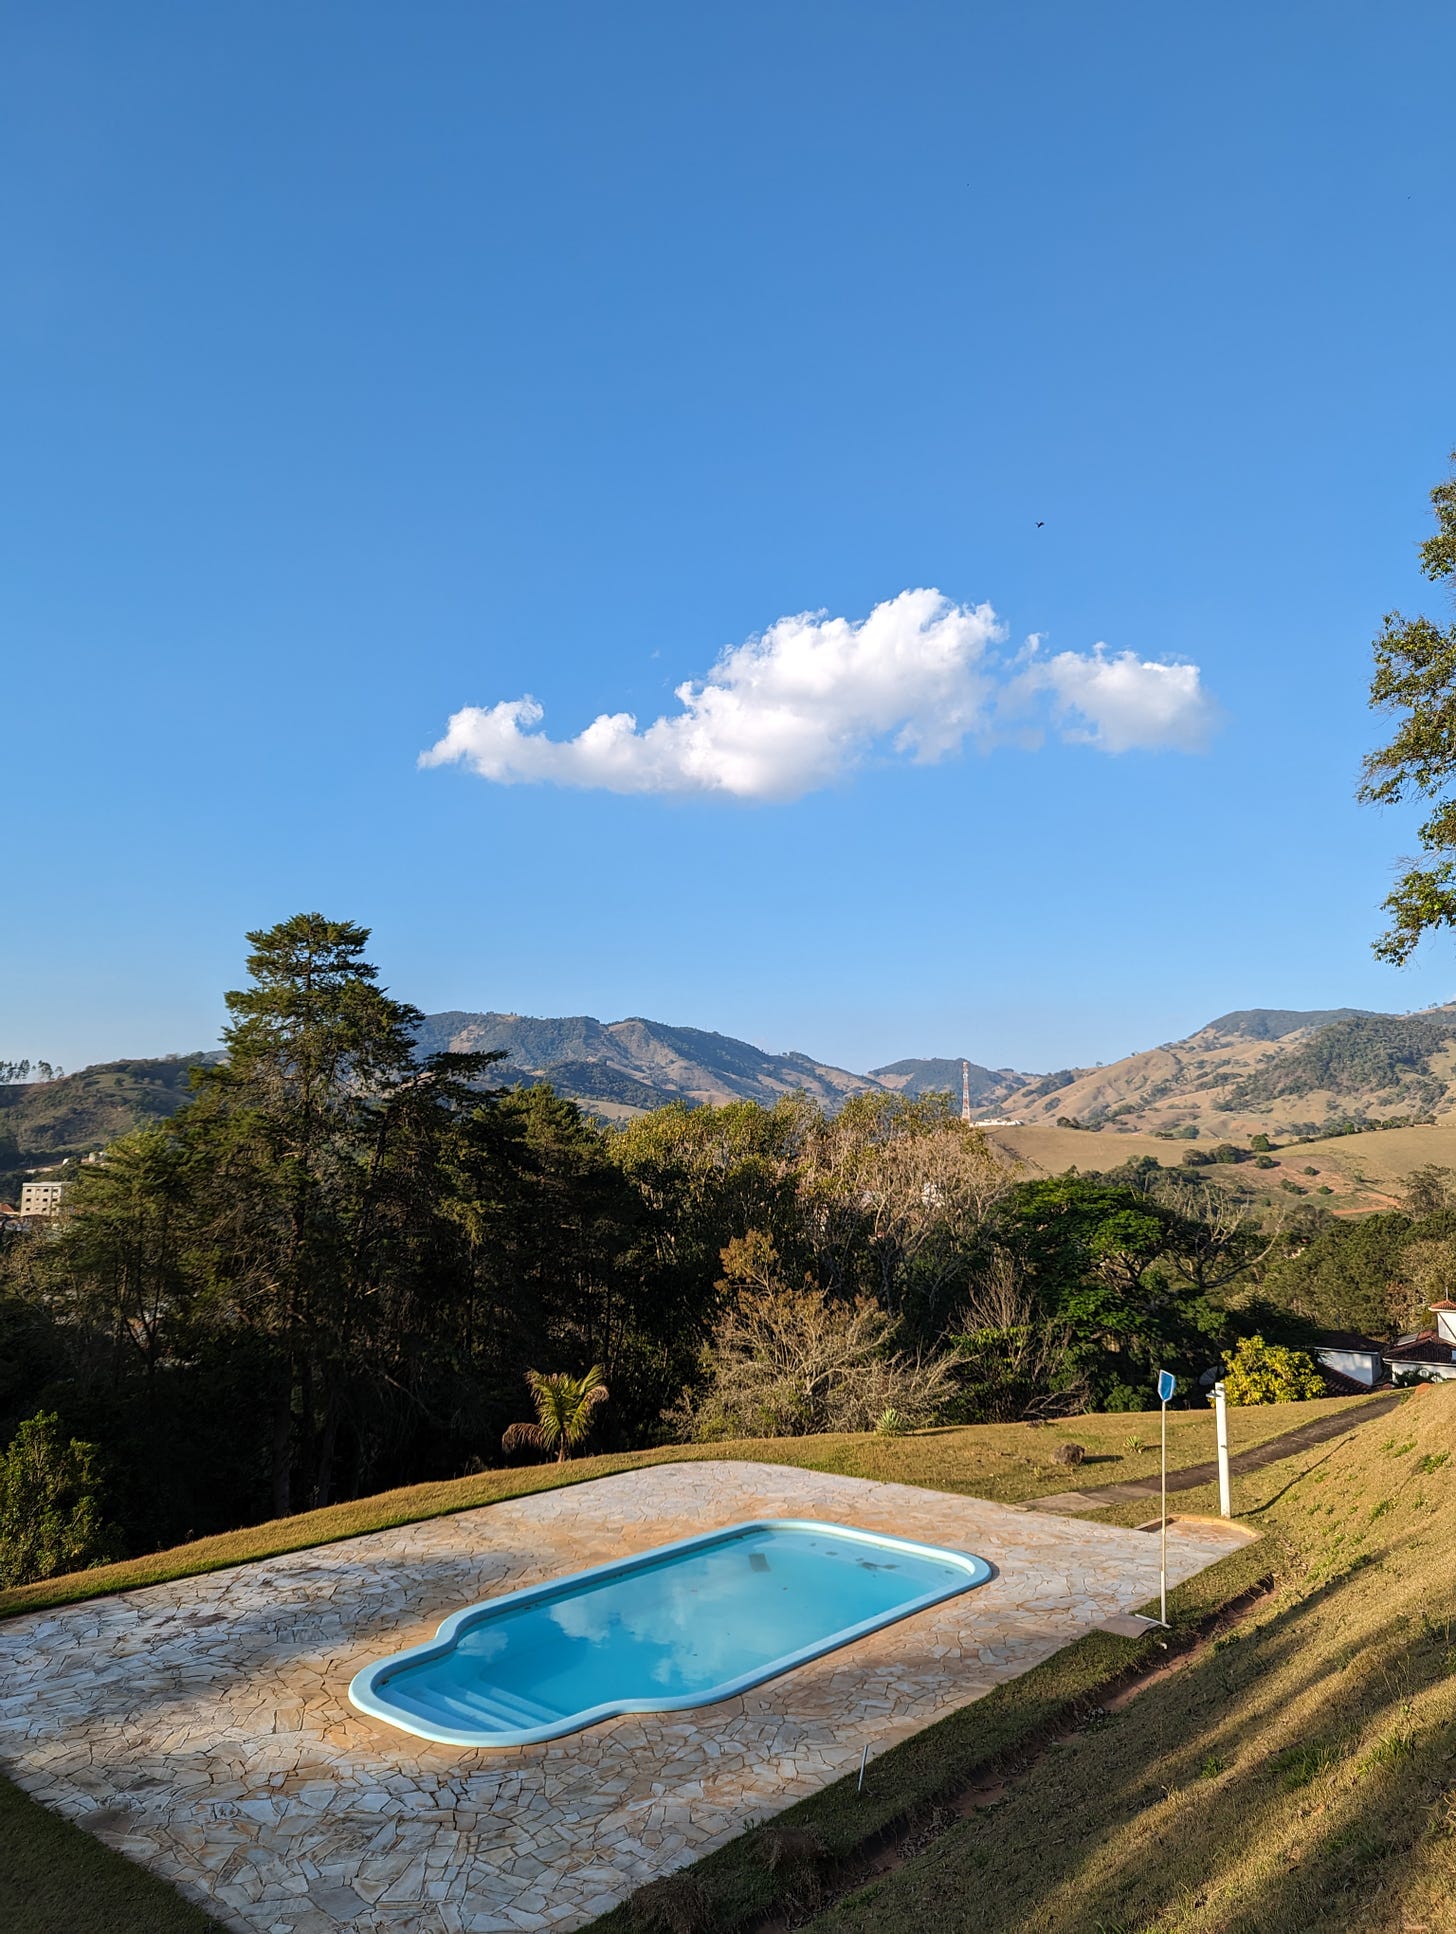 The view of a small, shallow swimming pool as seen from a hill, with trees around it and mountains in the distance. A blue sky above with just one white cloud and a black dot that appears to be a bird.